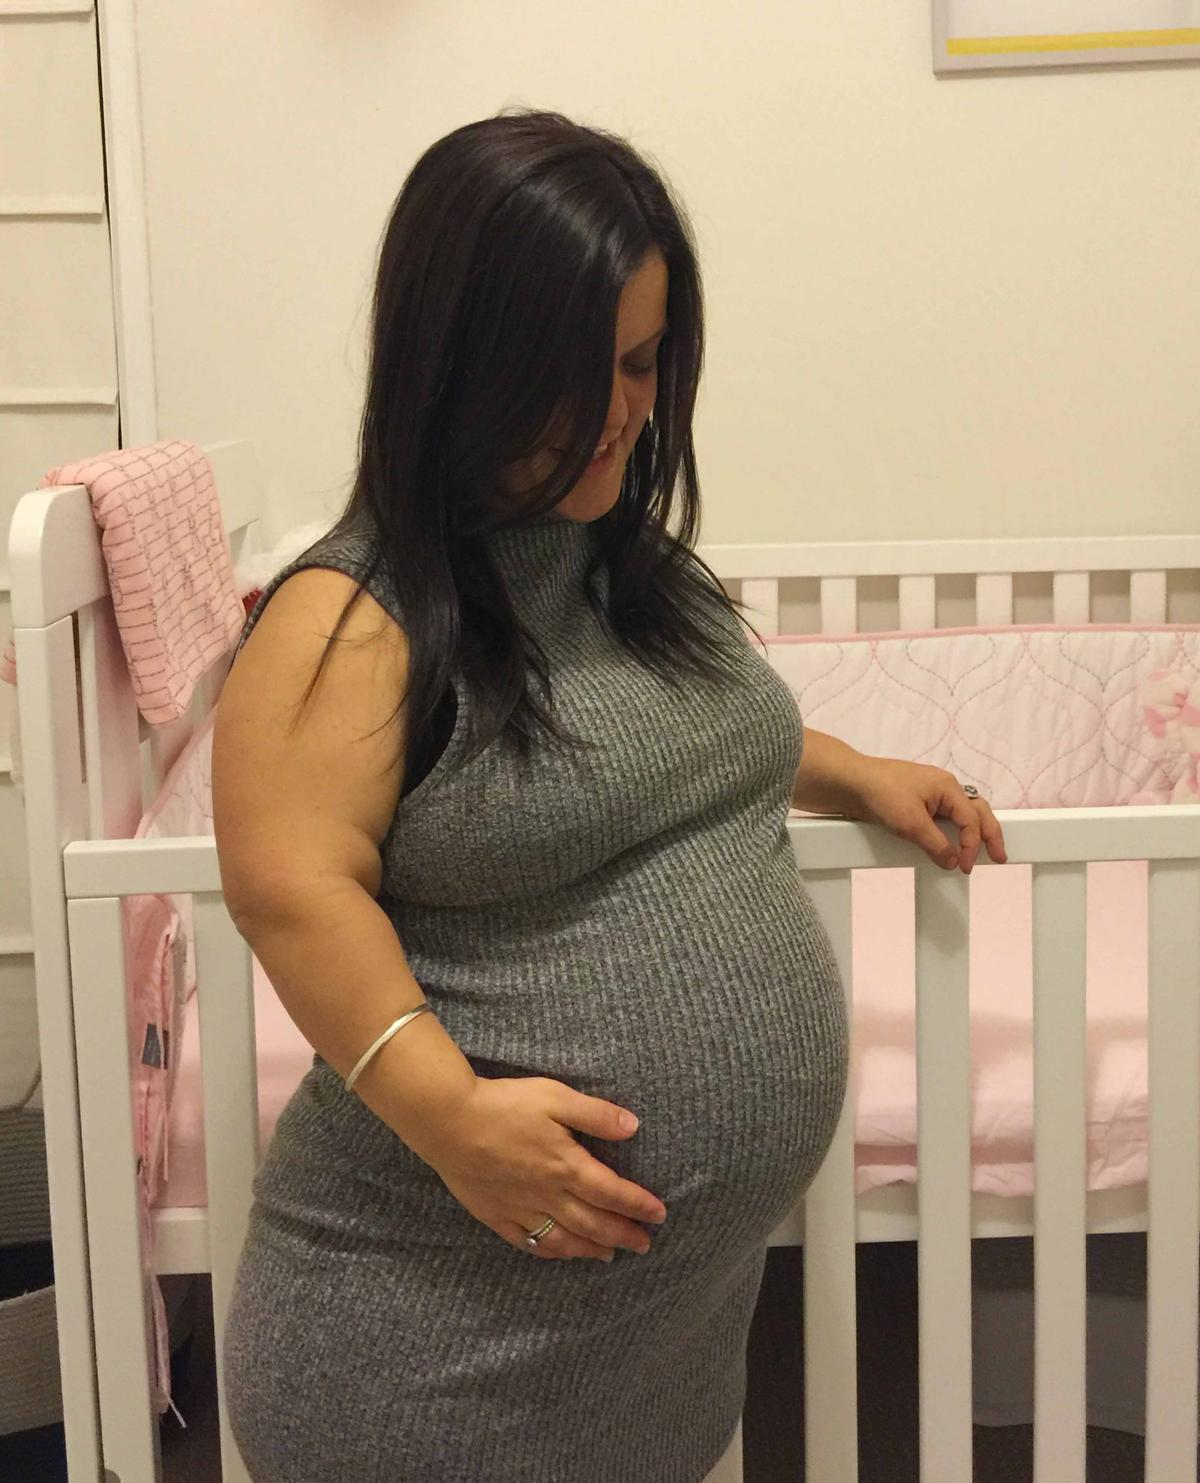 Alyssa pregnant with Sienna (Caters News)